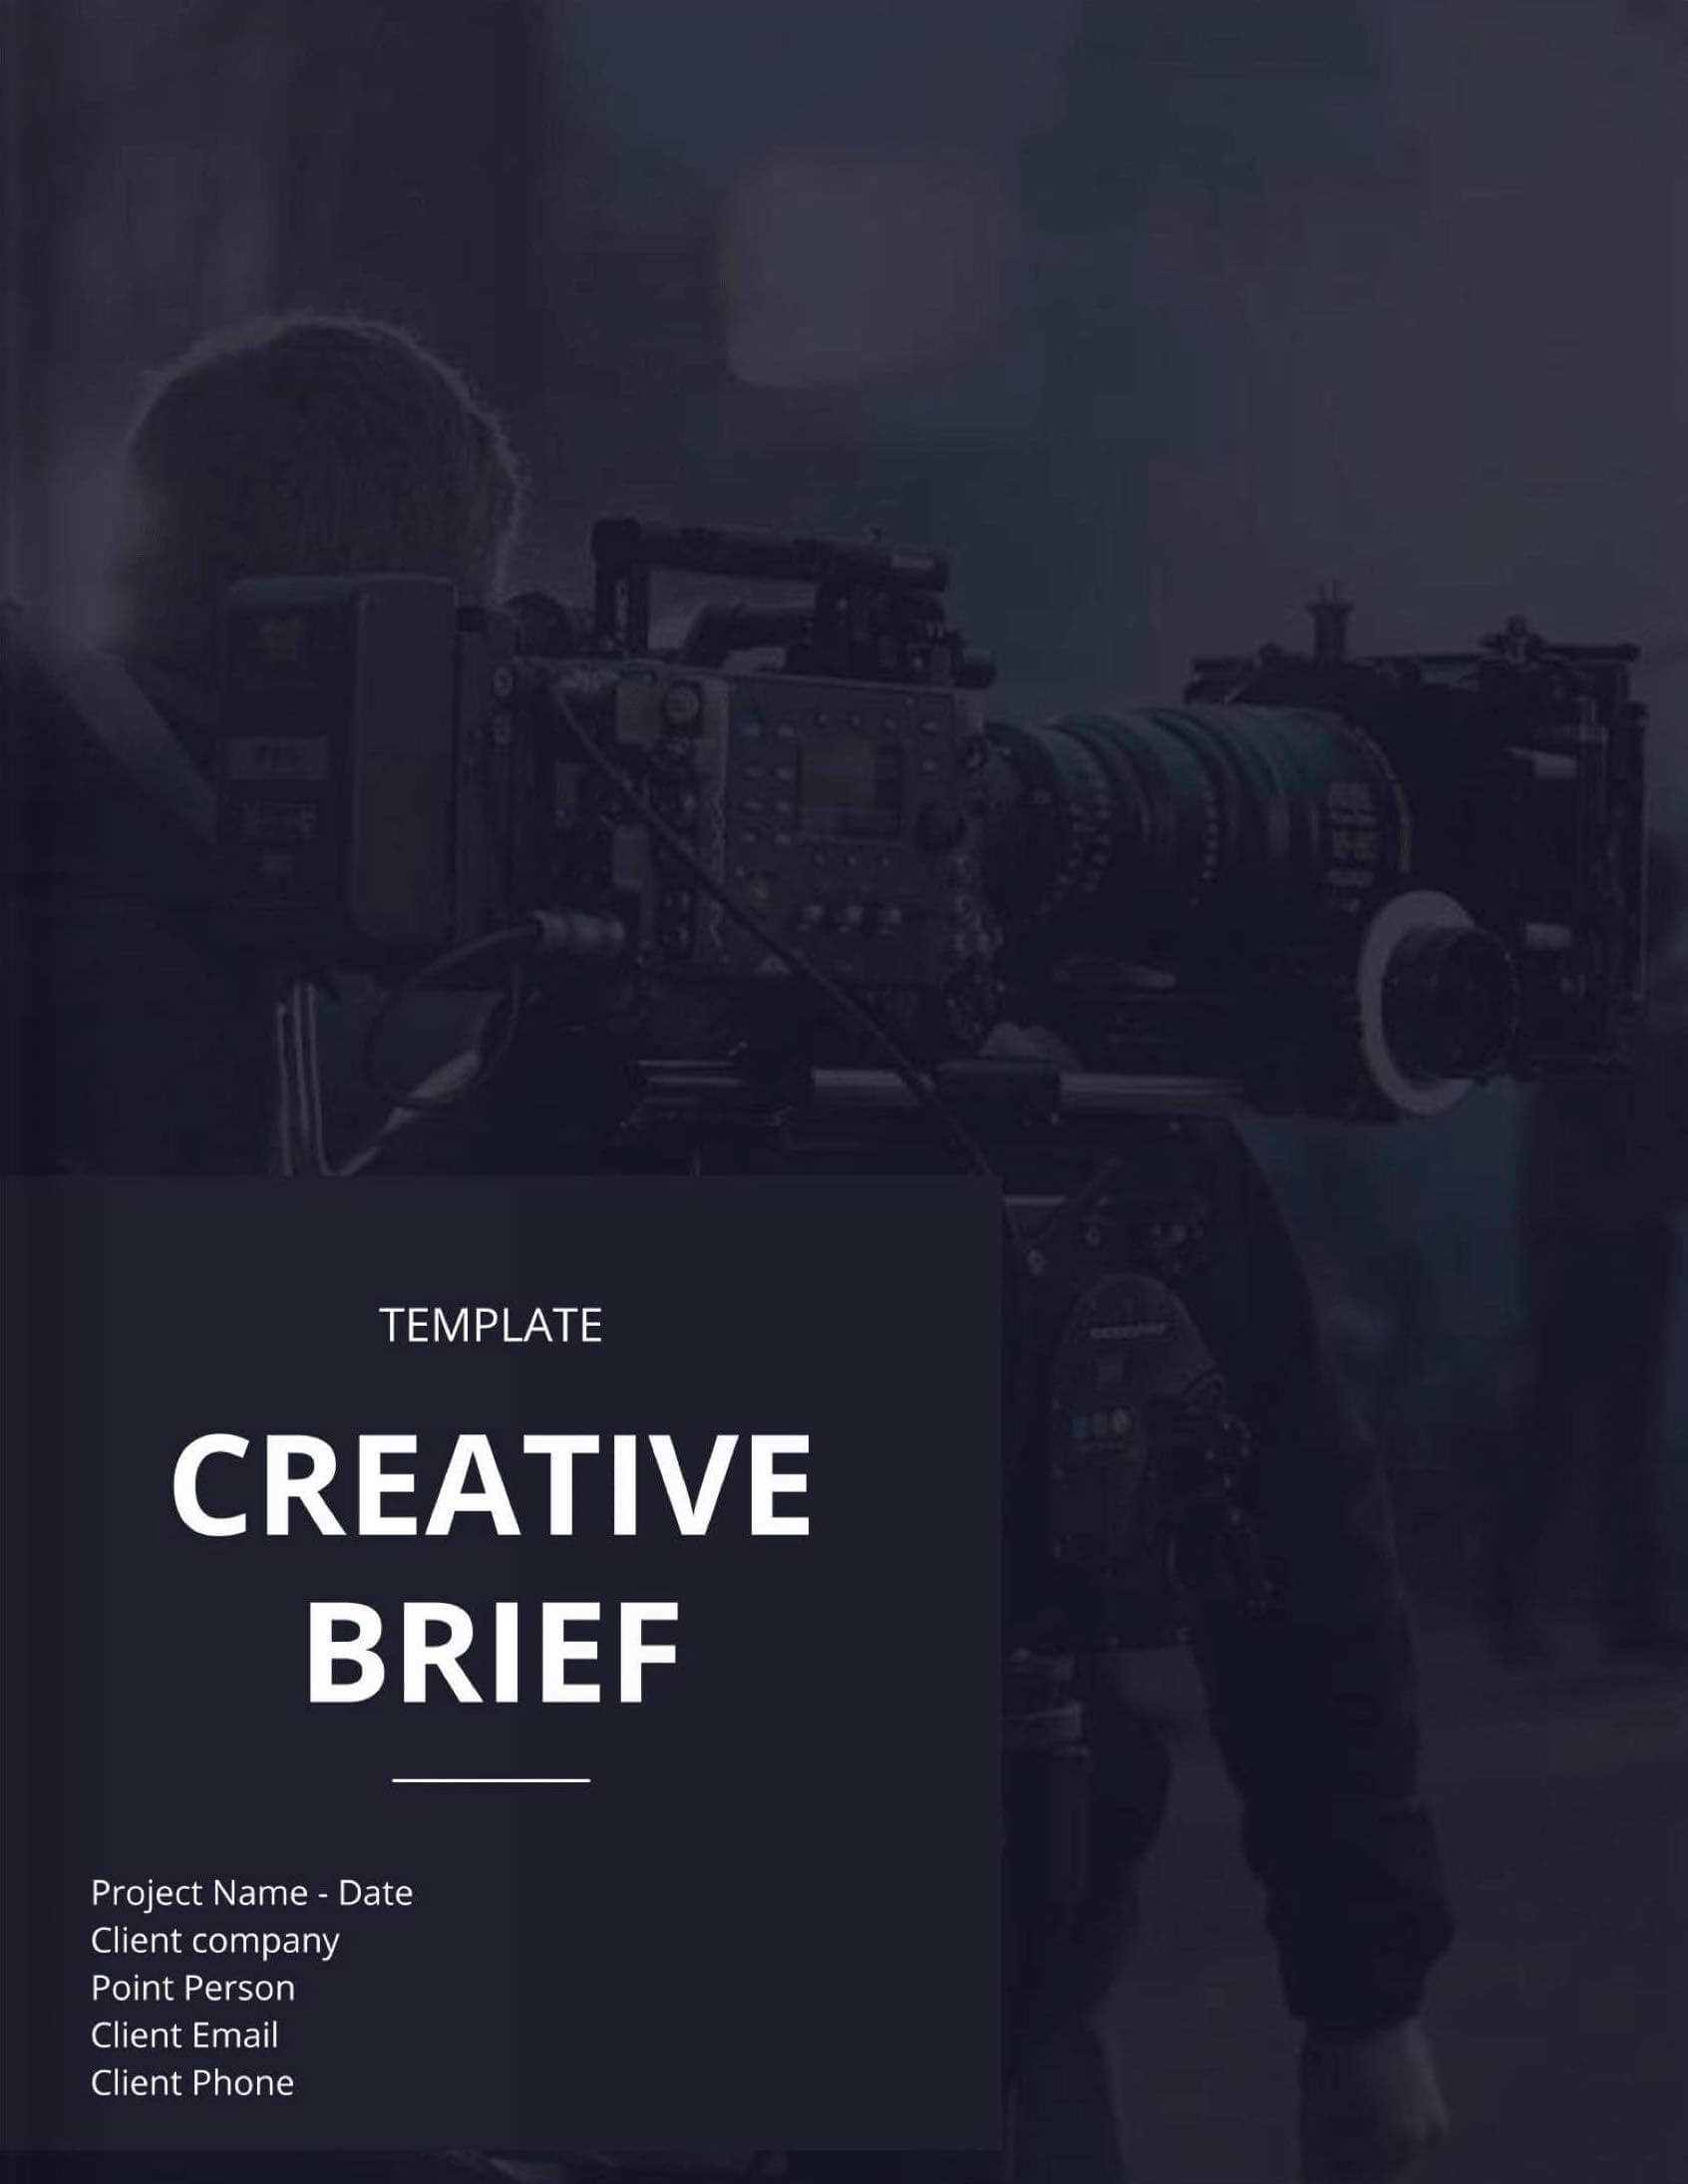 The-Best-Creative-Brief-Template-For-Video-Agencies-Free-Download-Cover Blog-StudioBinder